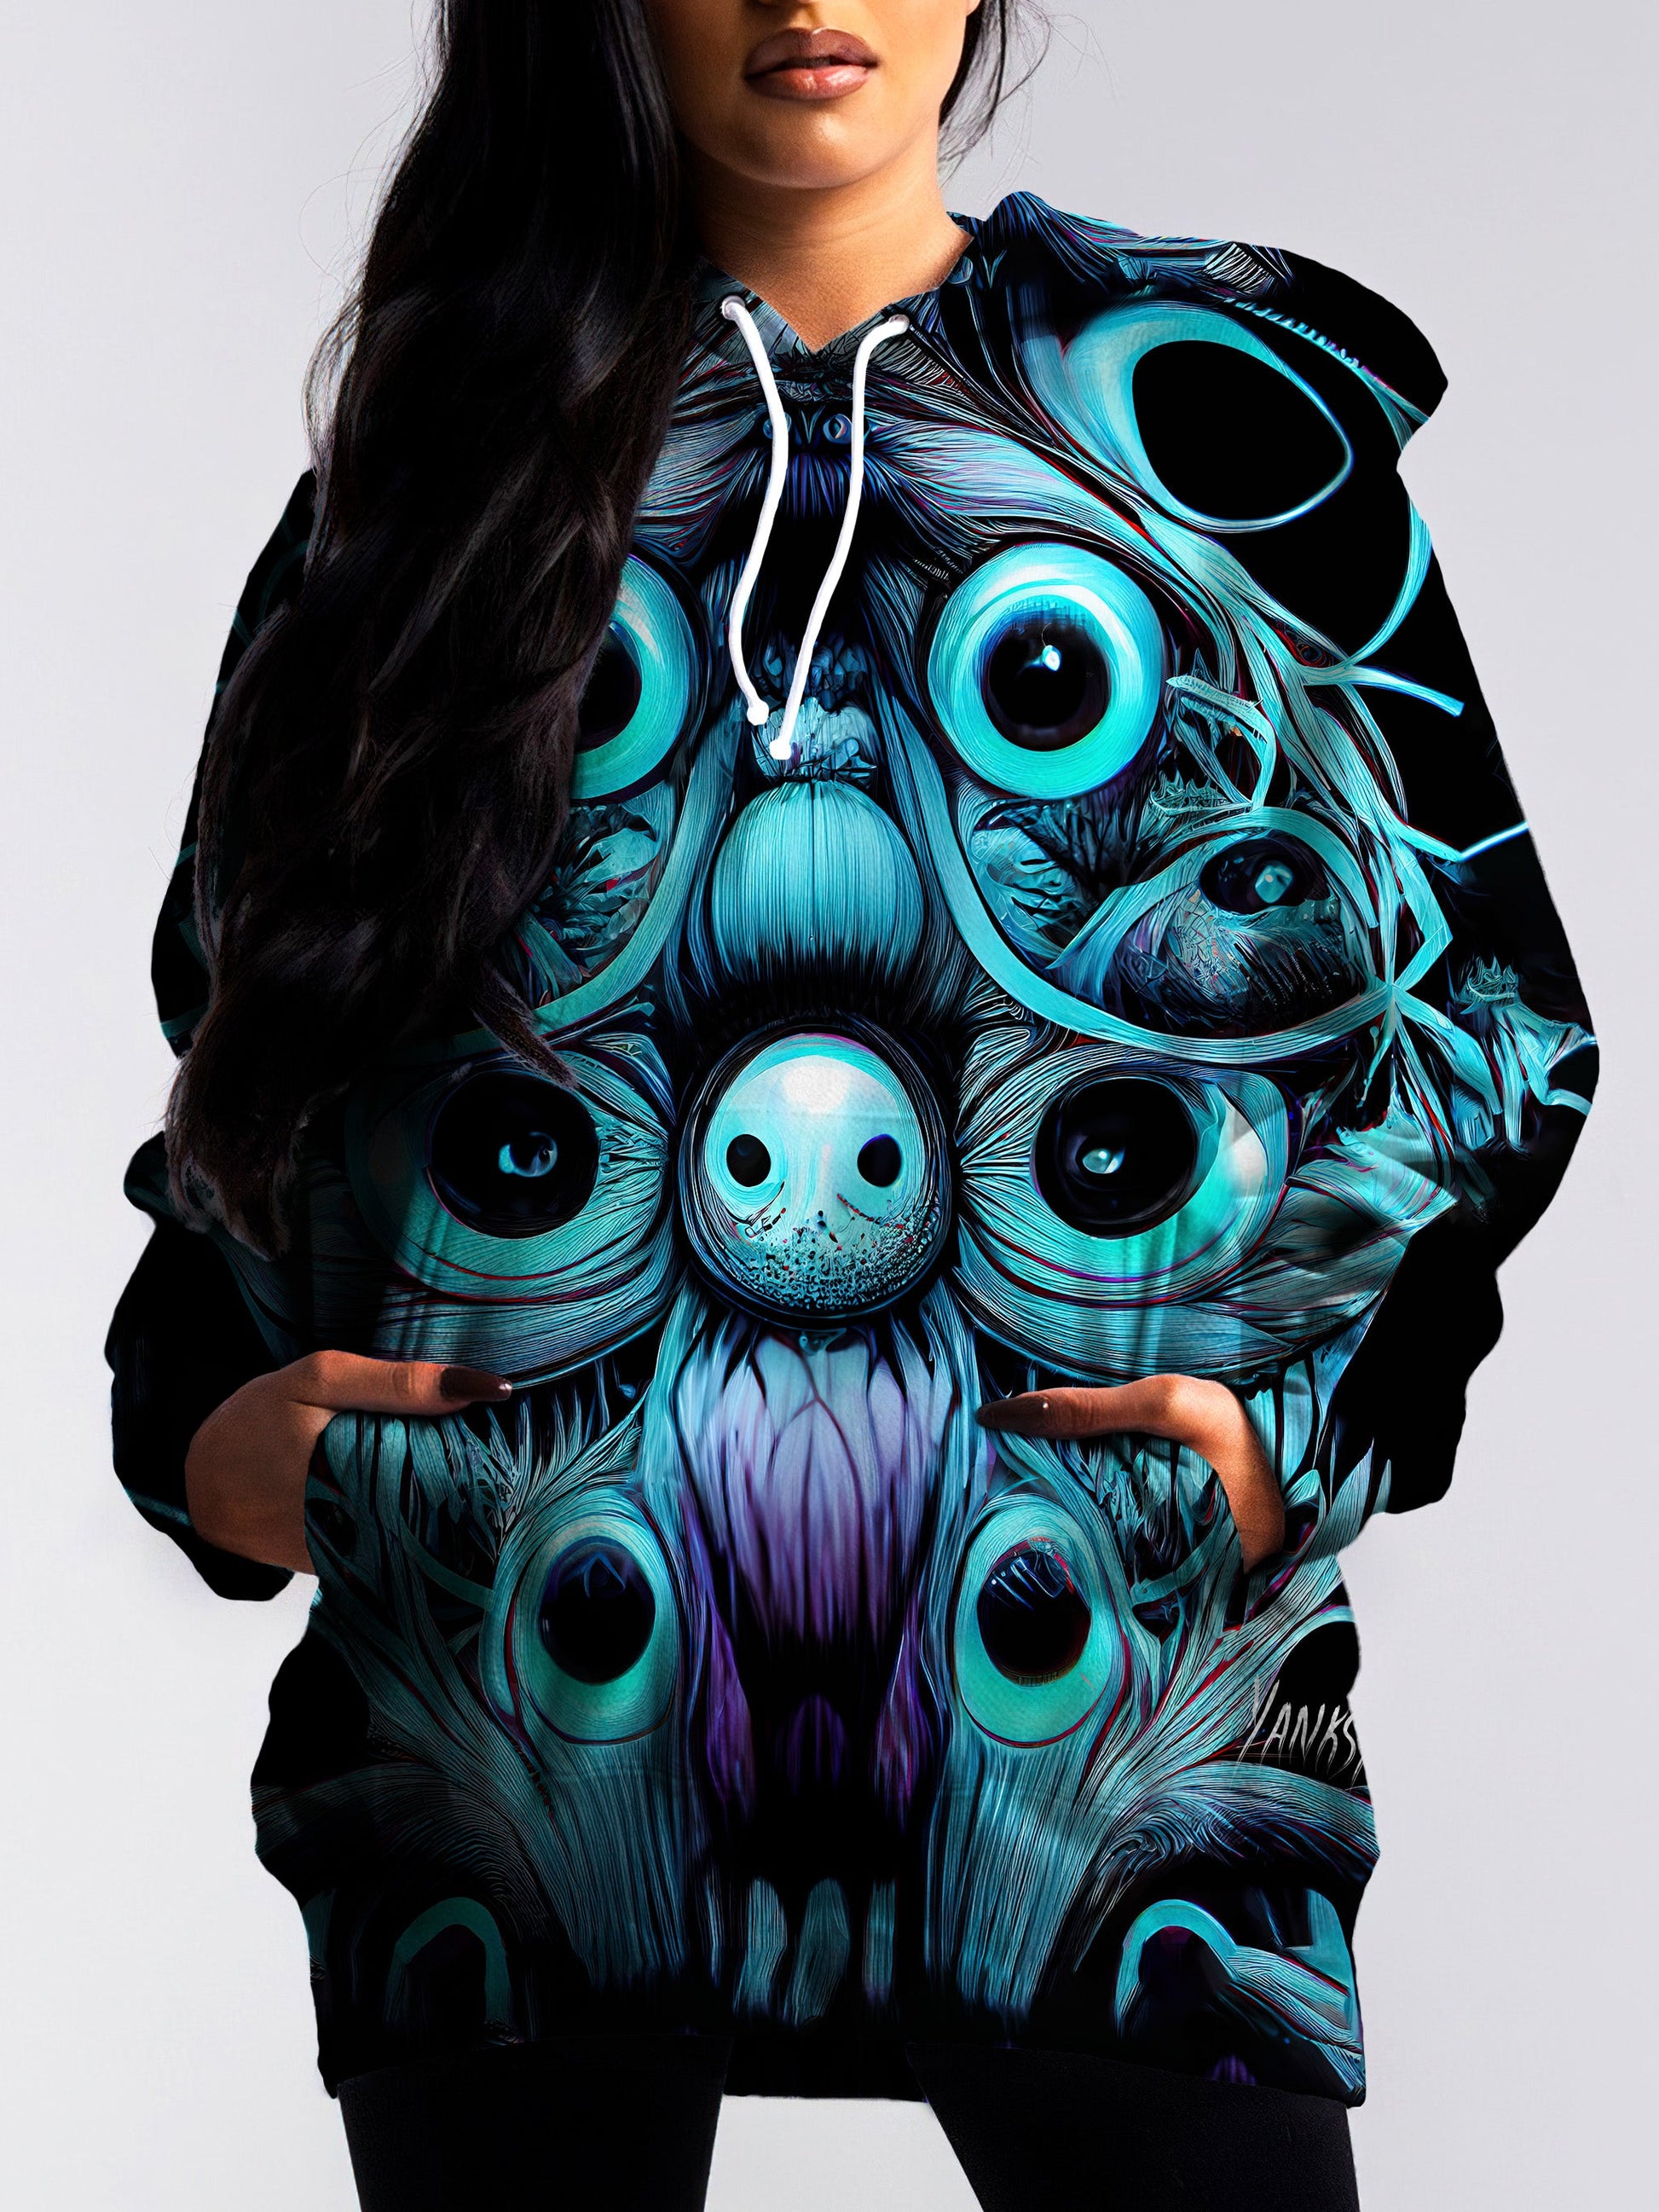 Stay warm and stylish at your next rave with this cozy pullover hoodie